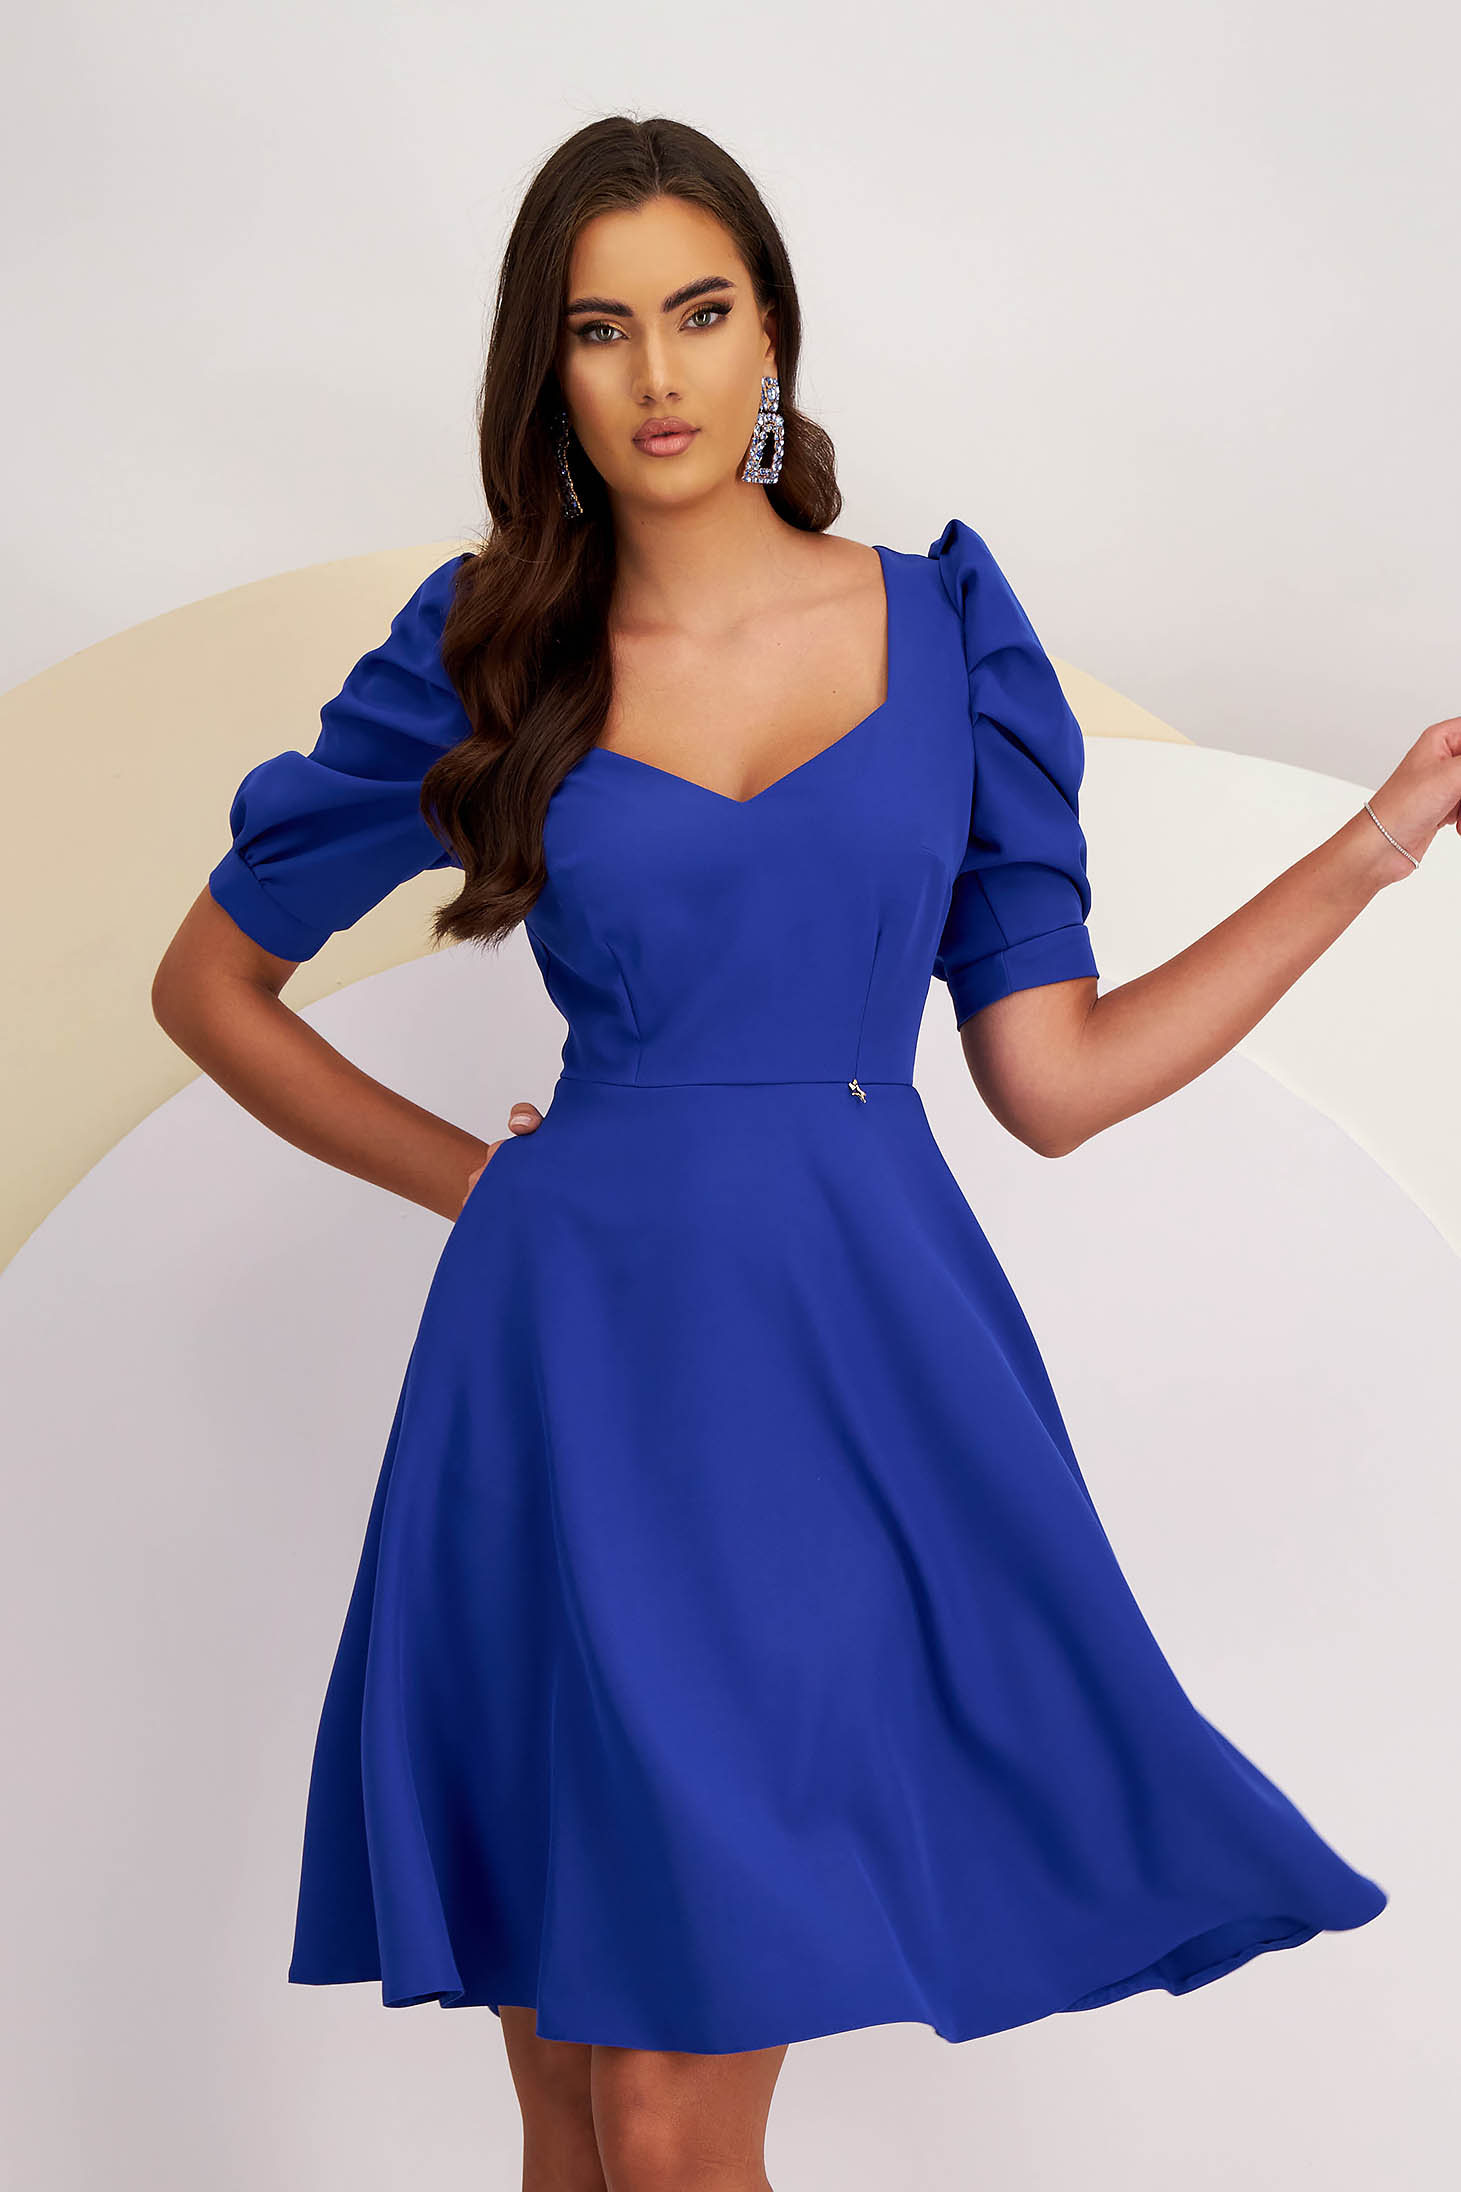 Blue Elastic Fabric Knee-Length Dress with Side Pockets and Puffed Sleeves - StarShinerS